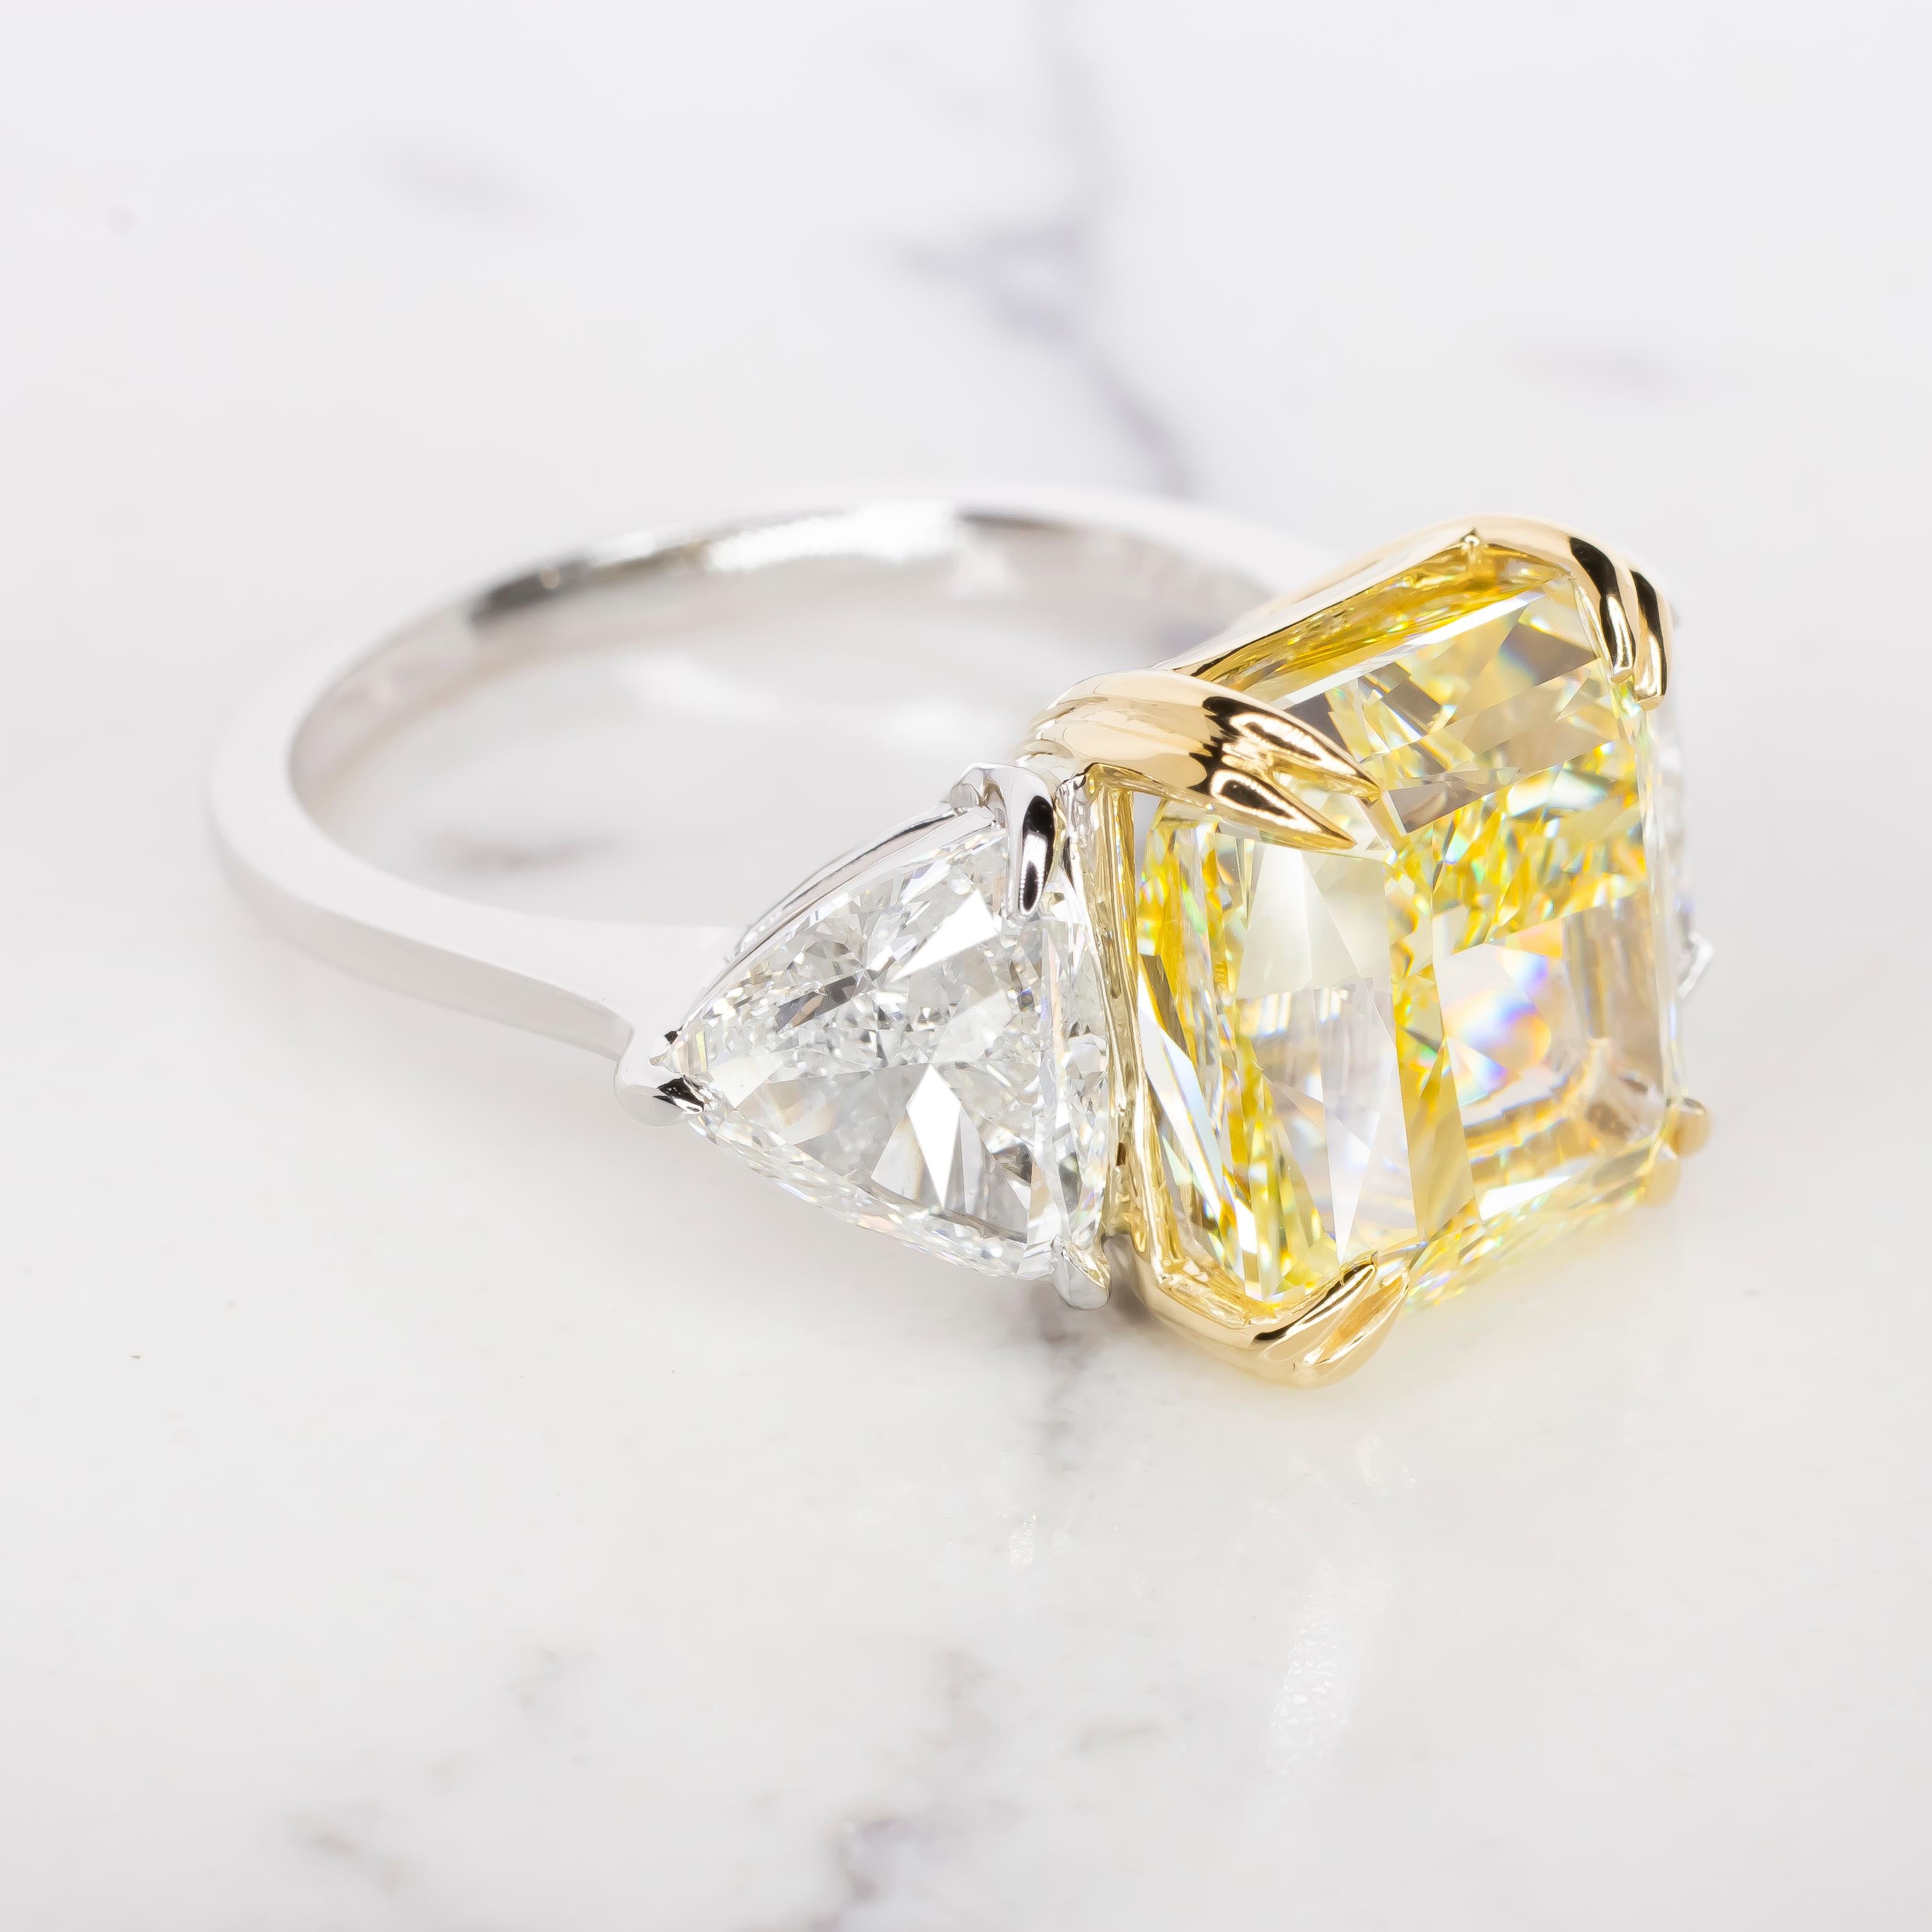 Radiate unparalleled elegance and sophistication with this GIA Certified 12 Ct Fancy Yellow Diamond Ring accentuated by trillion-cut diamonds. At the heart of this exceptional ring gleams a captivating fancy yellow diamond, certified by the